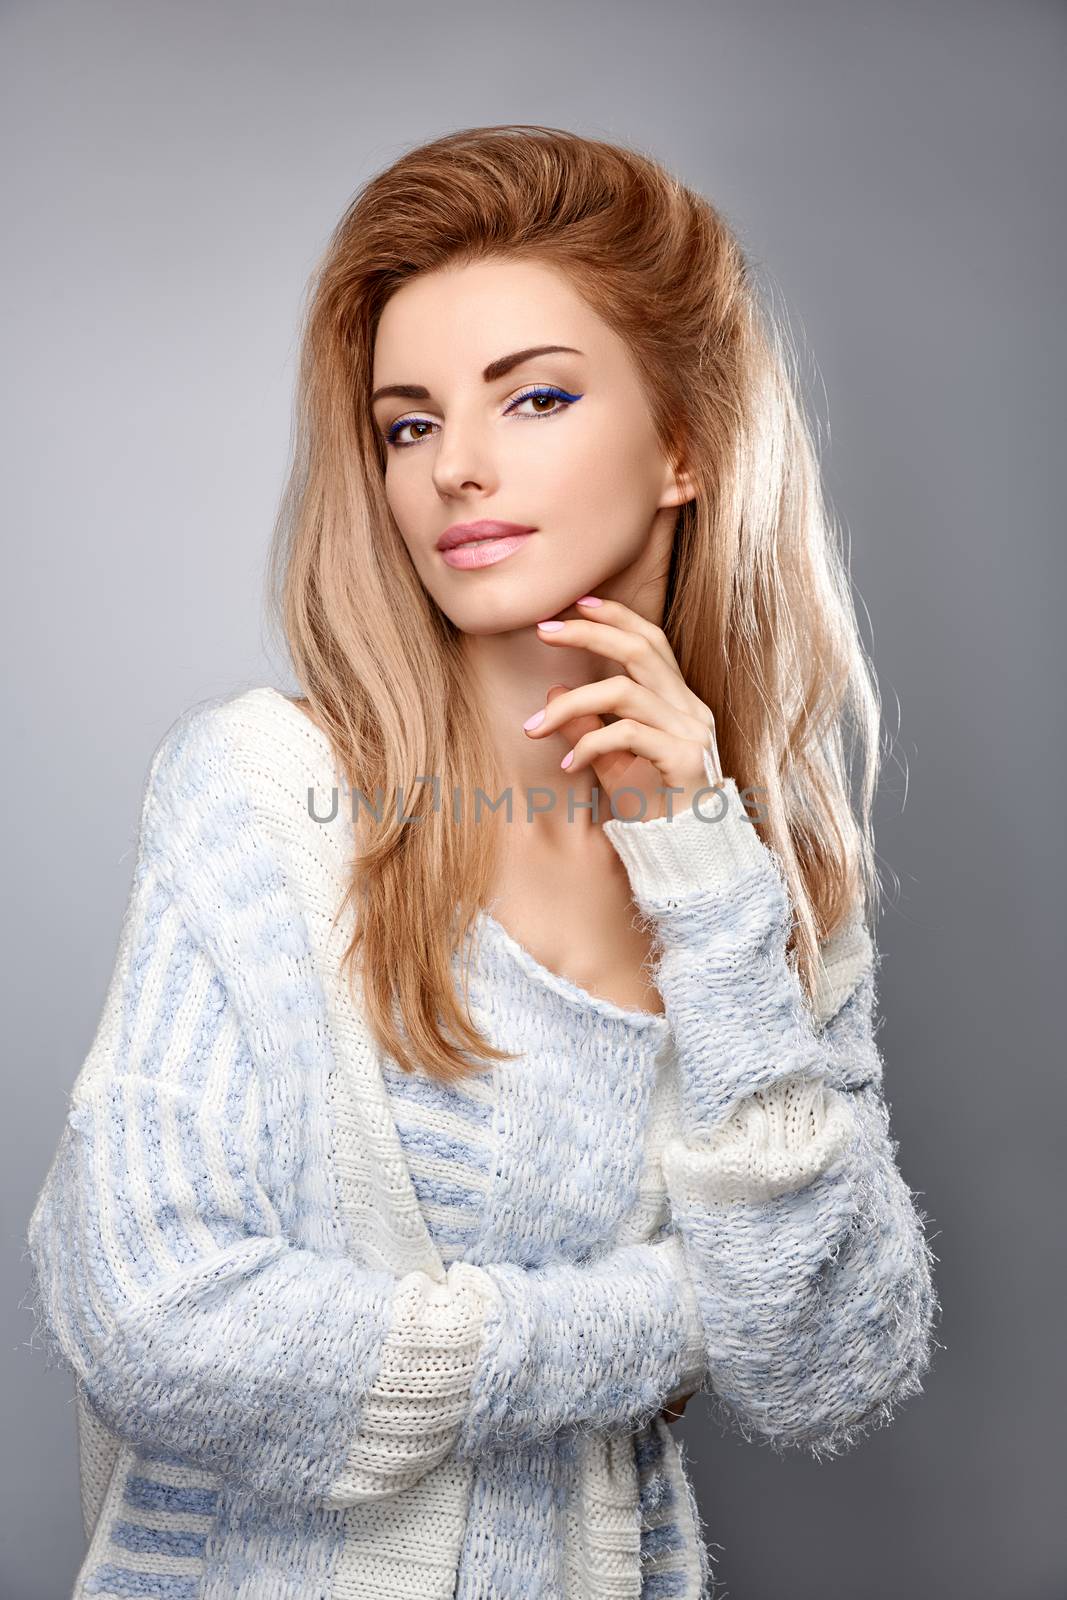 Beauty fashion portrait woman in stylish warm knitted sweater smiling. Sensual attractive pretty blonde sexy model girl, shiny straight hair. Unusual creative provocative. Emotional playful people